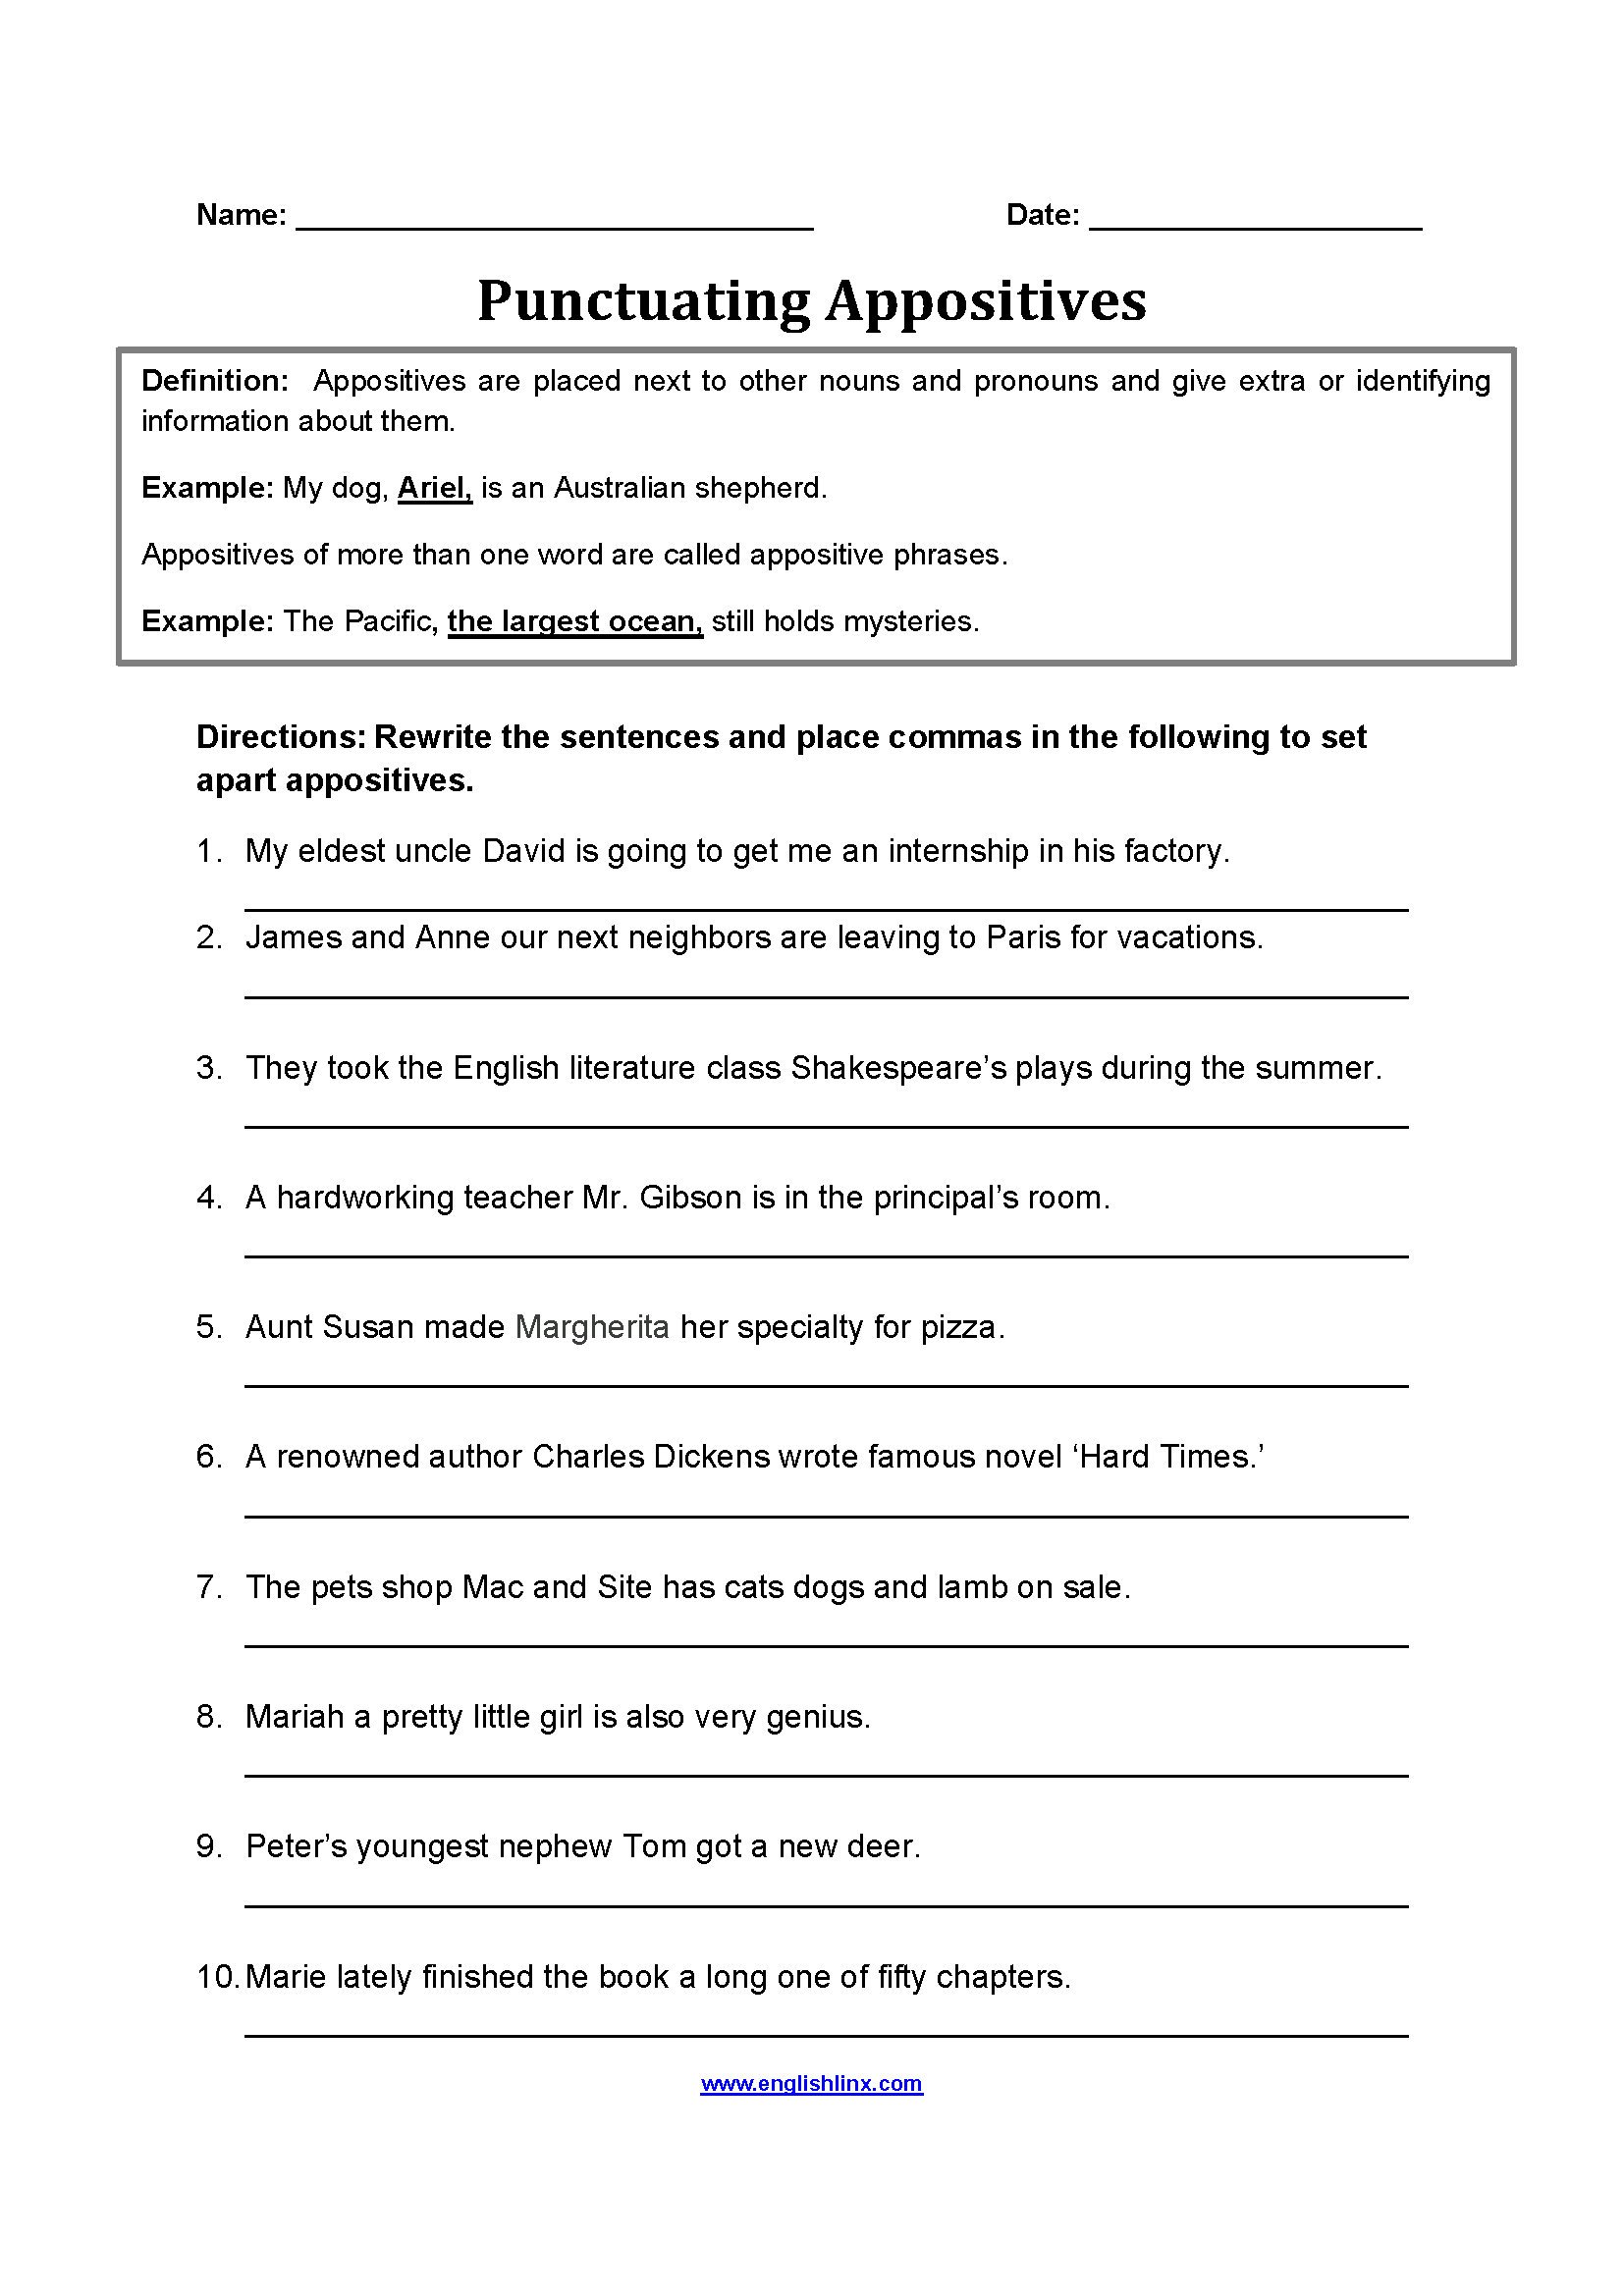 Punctuating Appositives Worksheets